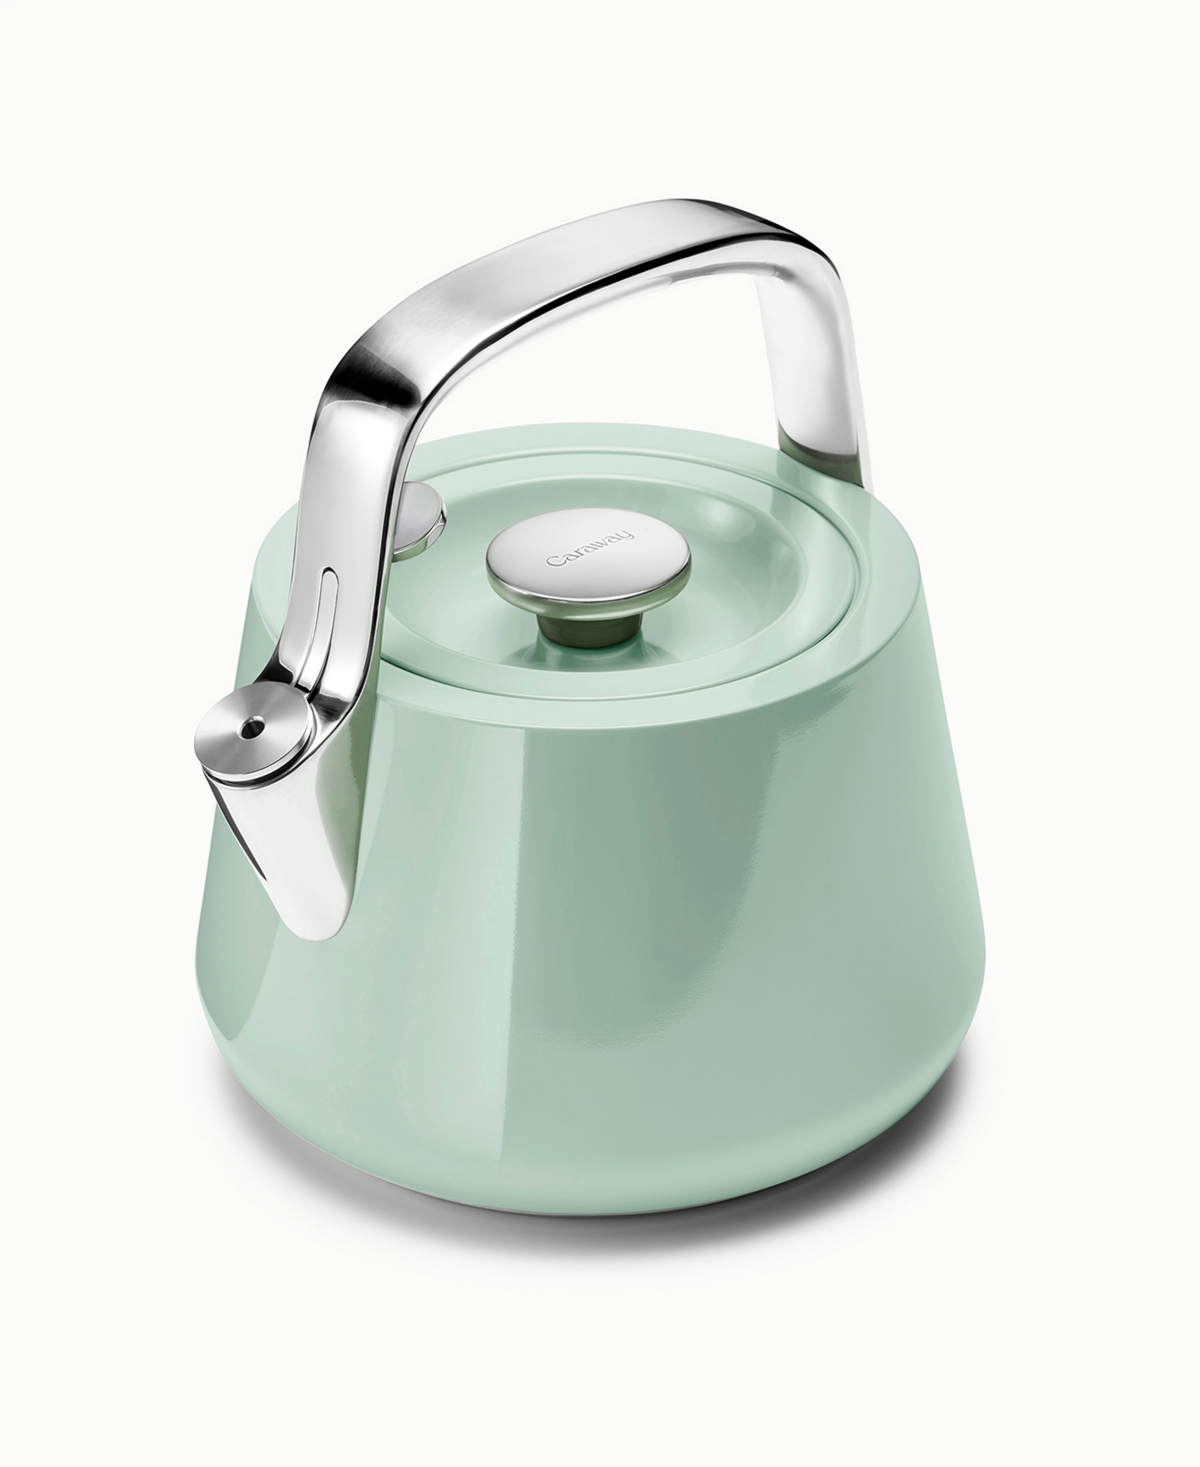 Caraway Stovetop Whistling Tea Kettle